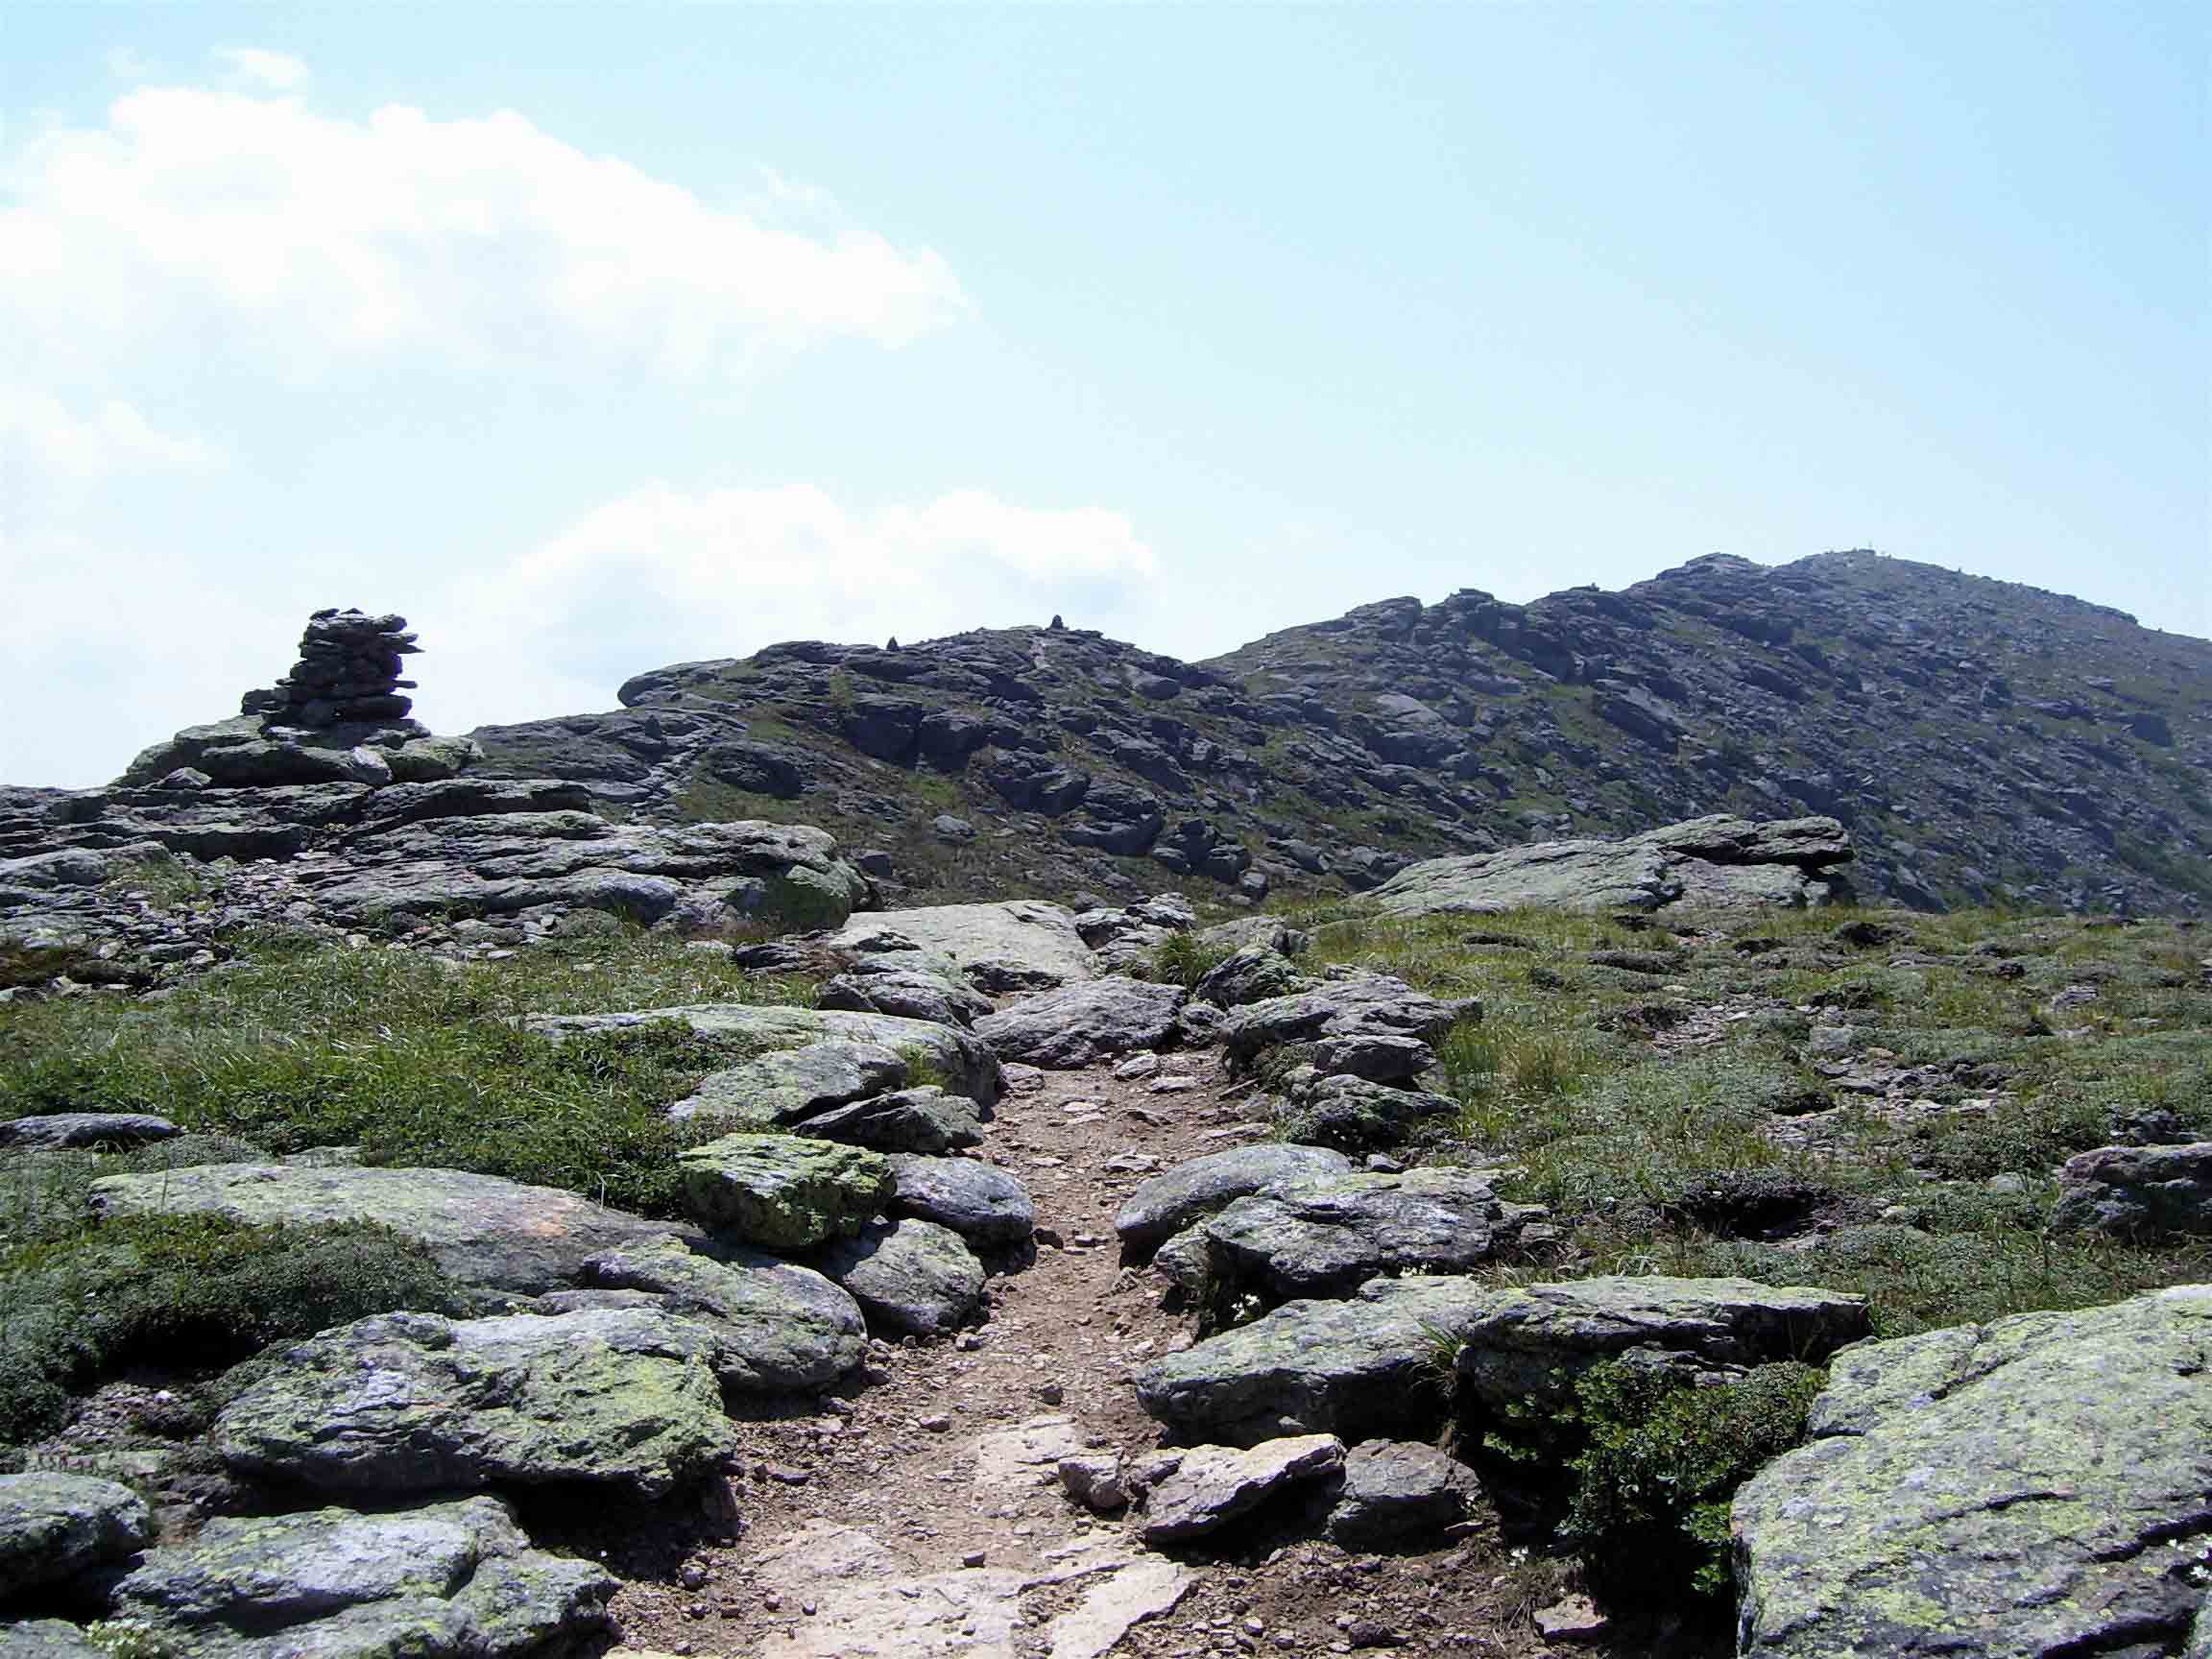 The southbound AT (here called the Garfield Ridge Trail) as it climbs along the ridge above treeline towards the summit of Mt. Lafayette. Taken from approx. Mile 21.1.  Courtesy dlcul@conncoll.edu